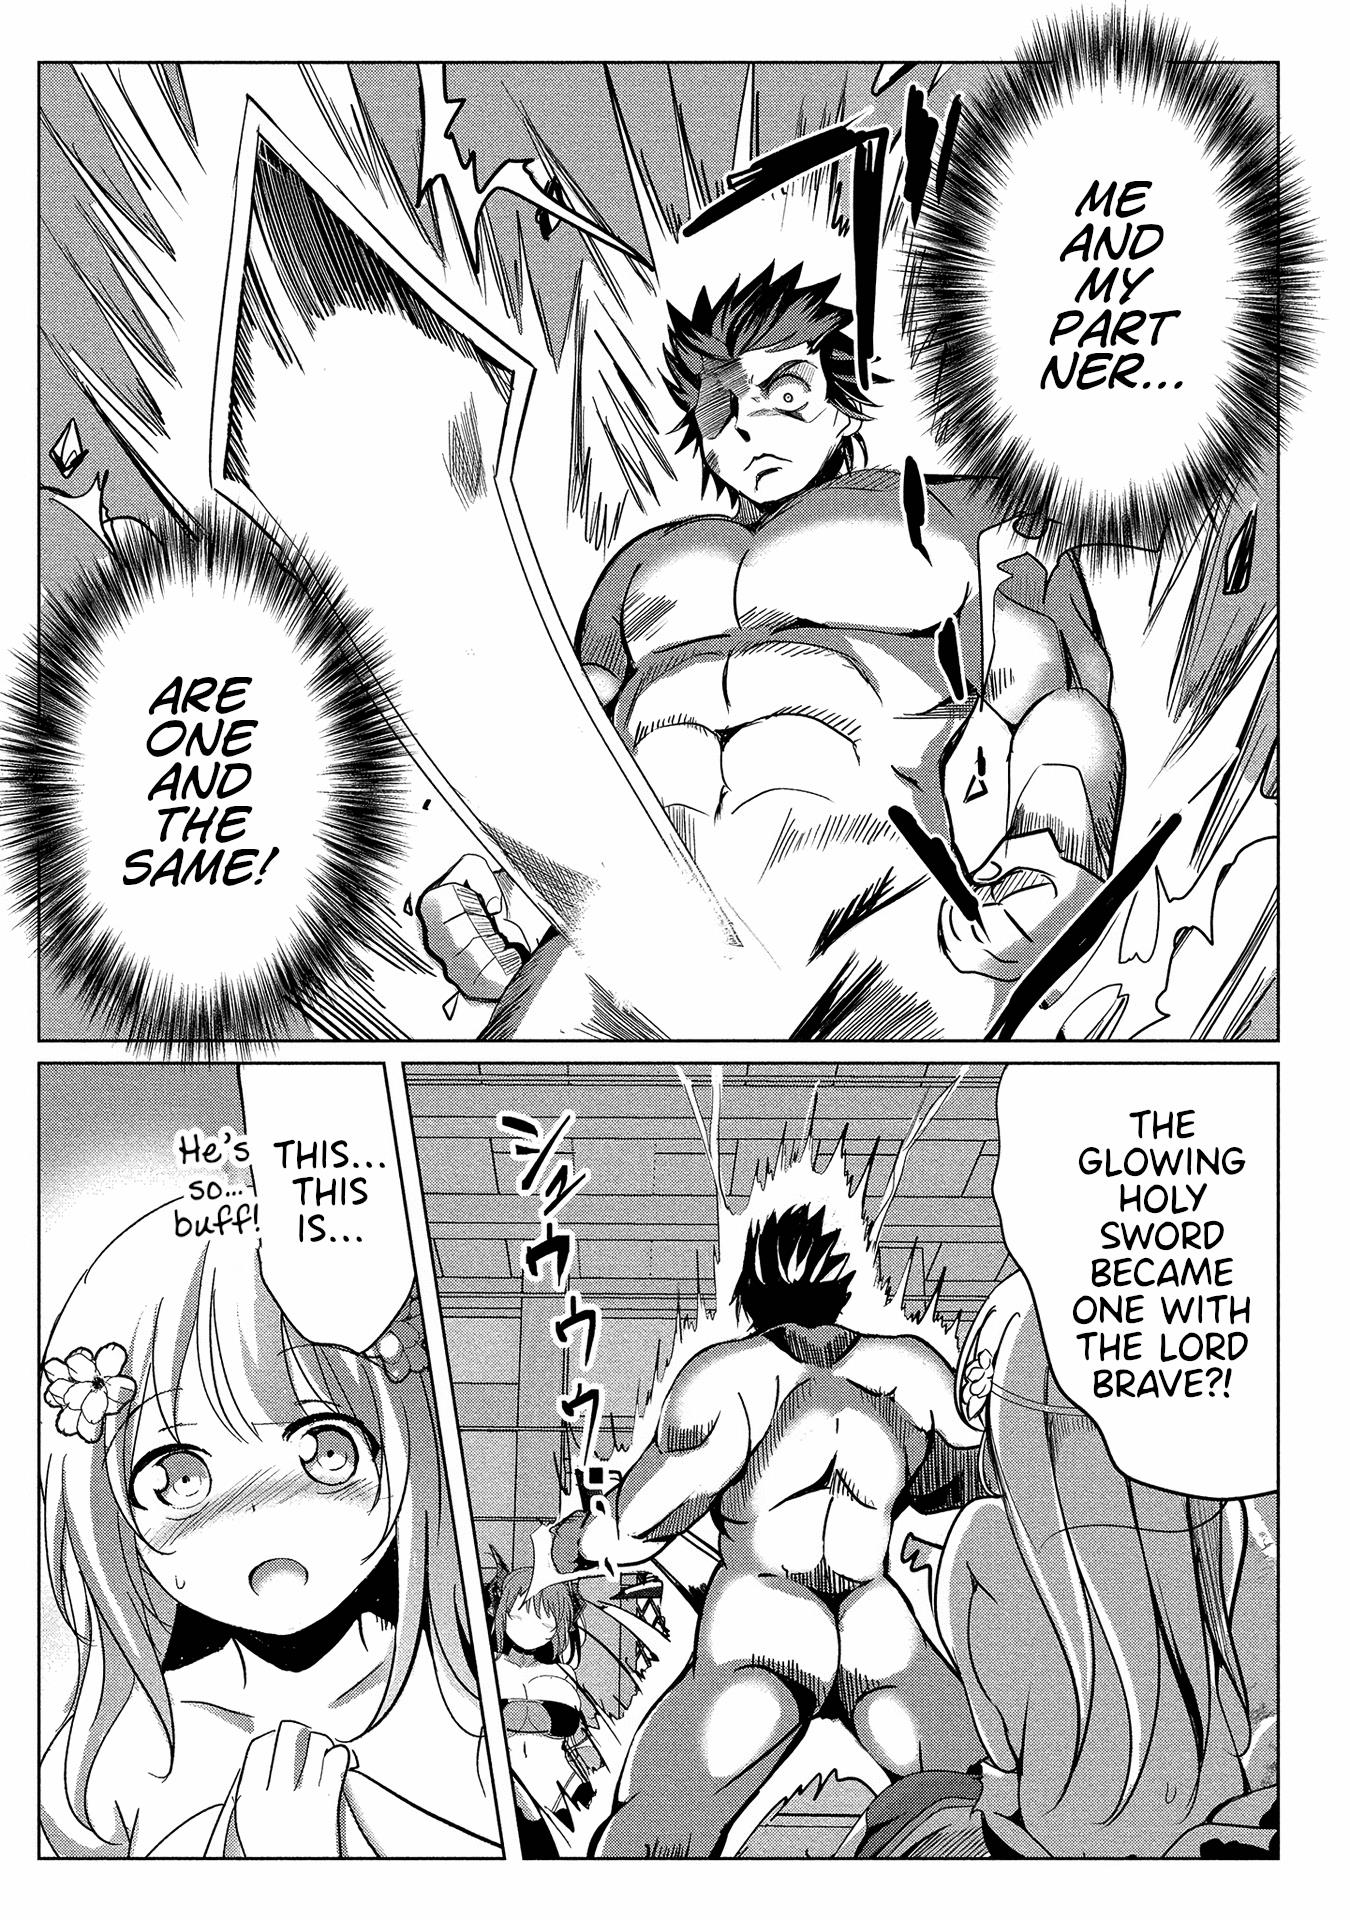 Dunking On Succubi In Another World Vol.1 Chapter 5: Shine! Roar! Let It All Out! Dxdick Staff! - Picture 3